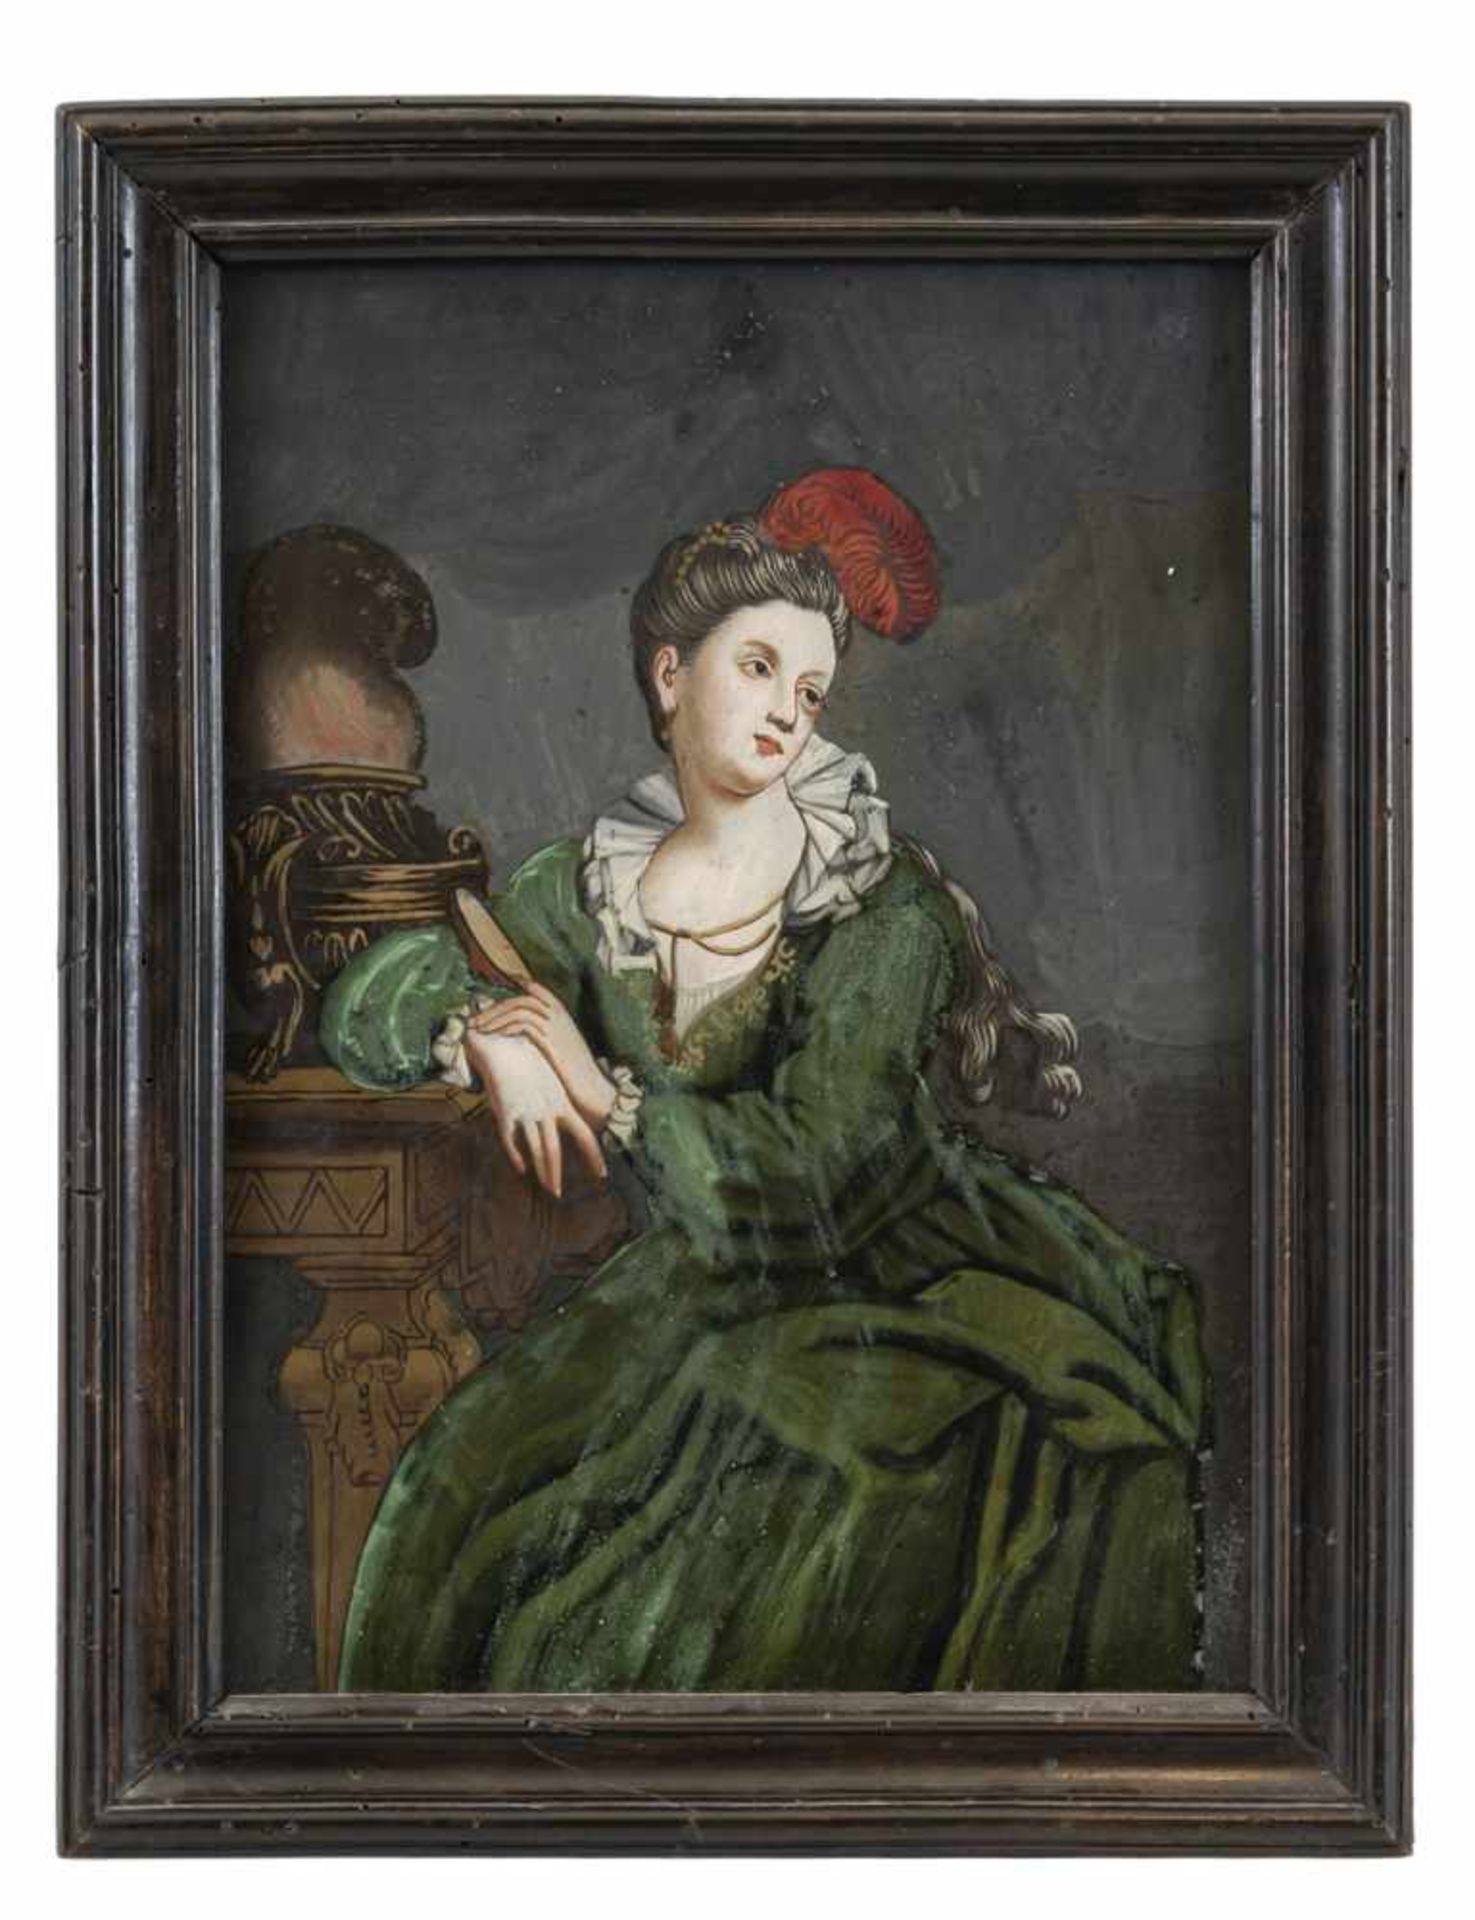 A GLASS PAINTING ON REVERSE, South German, c. 1730/40. A lady in a green dress. Minor wear. - Image 2 of 2